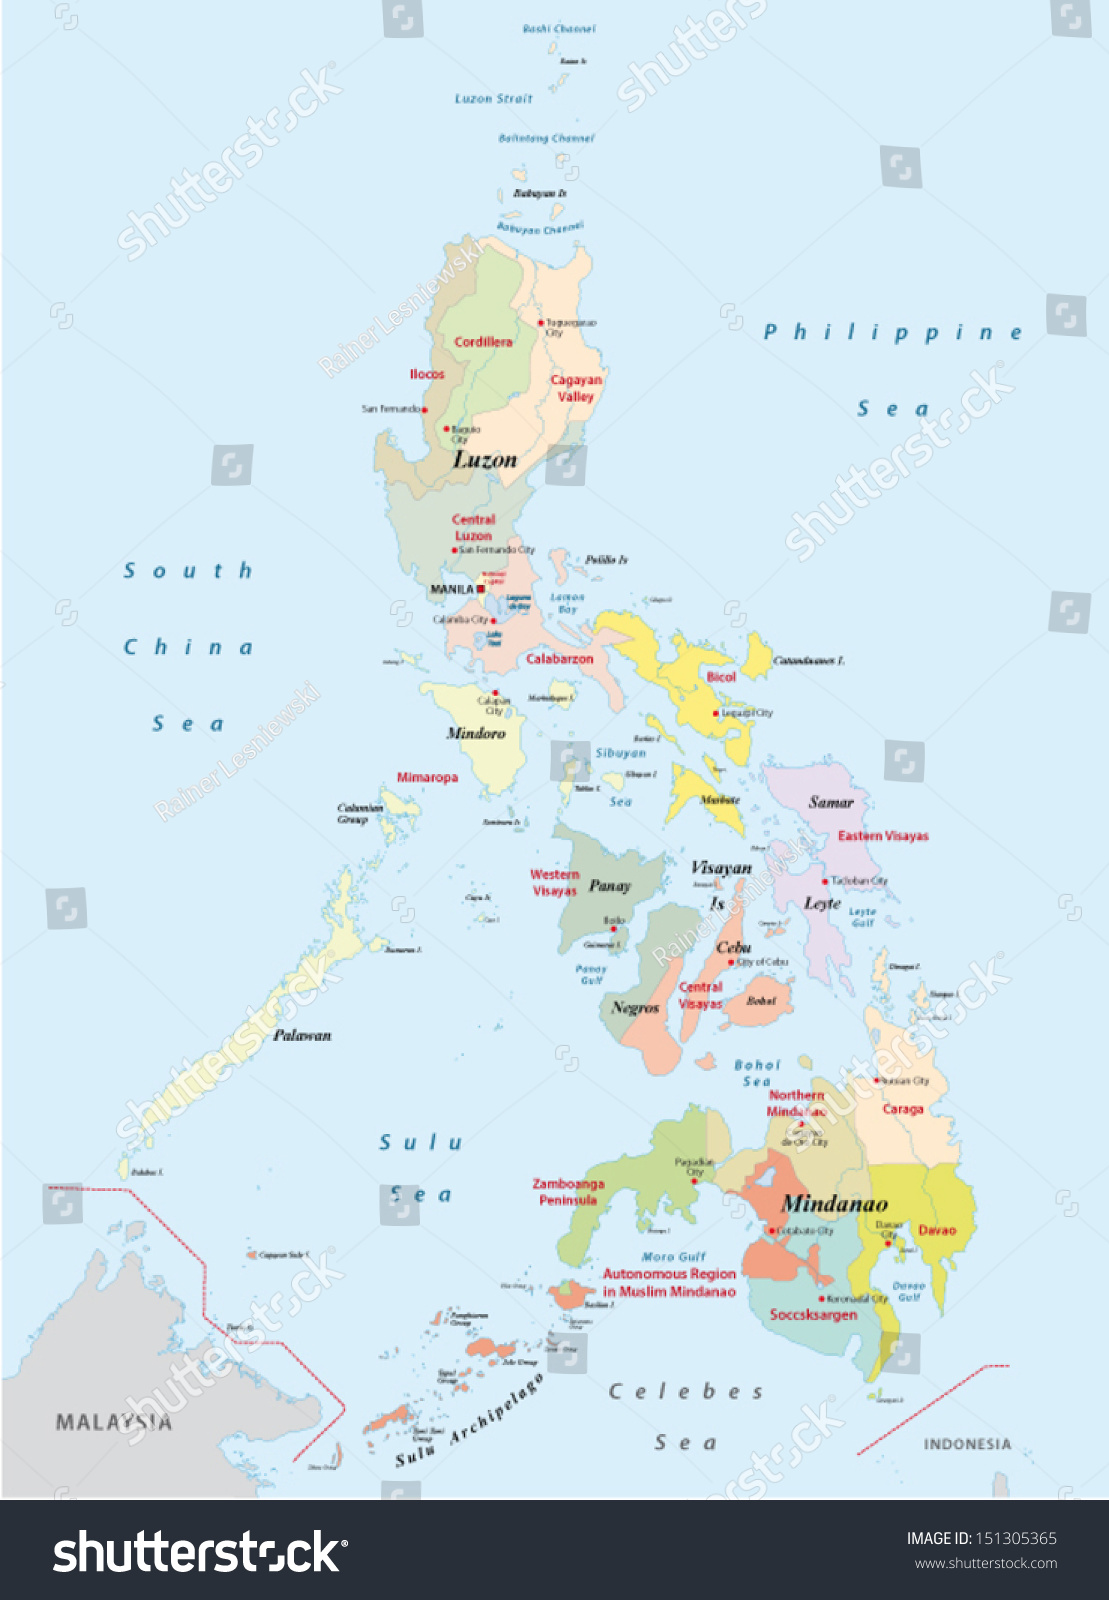 Philippines Administrative Map Stock Vector 151305365 : Shutterstock